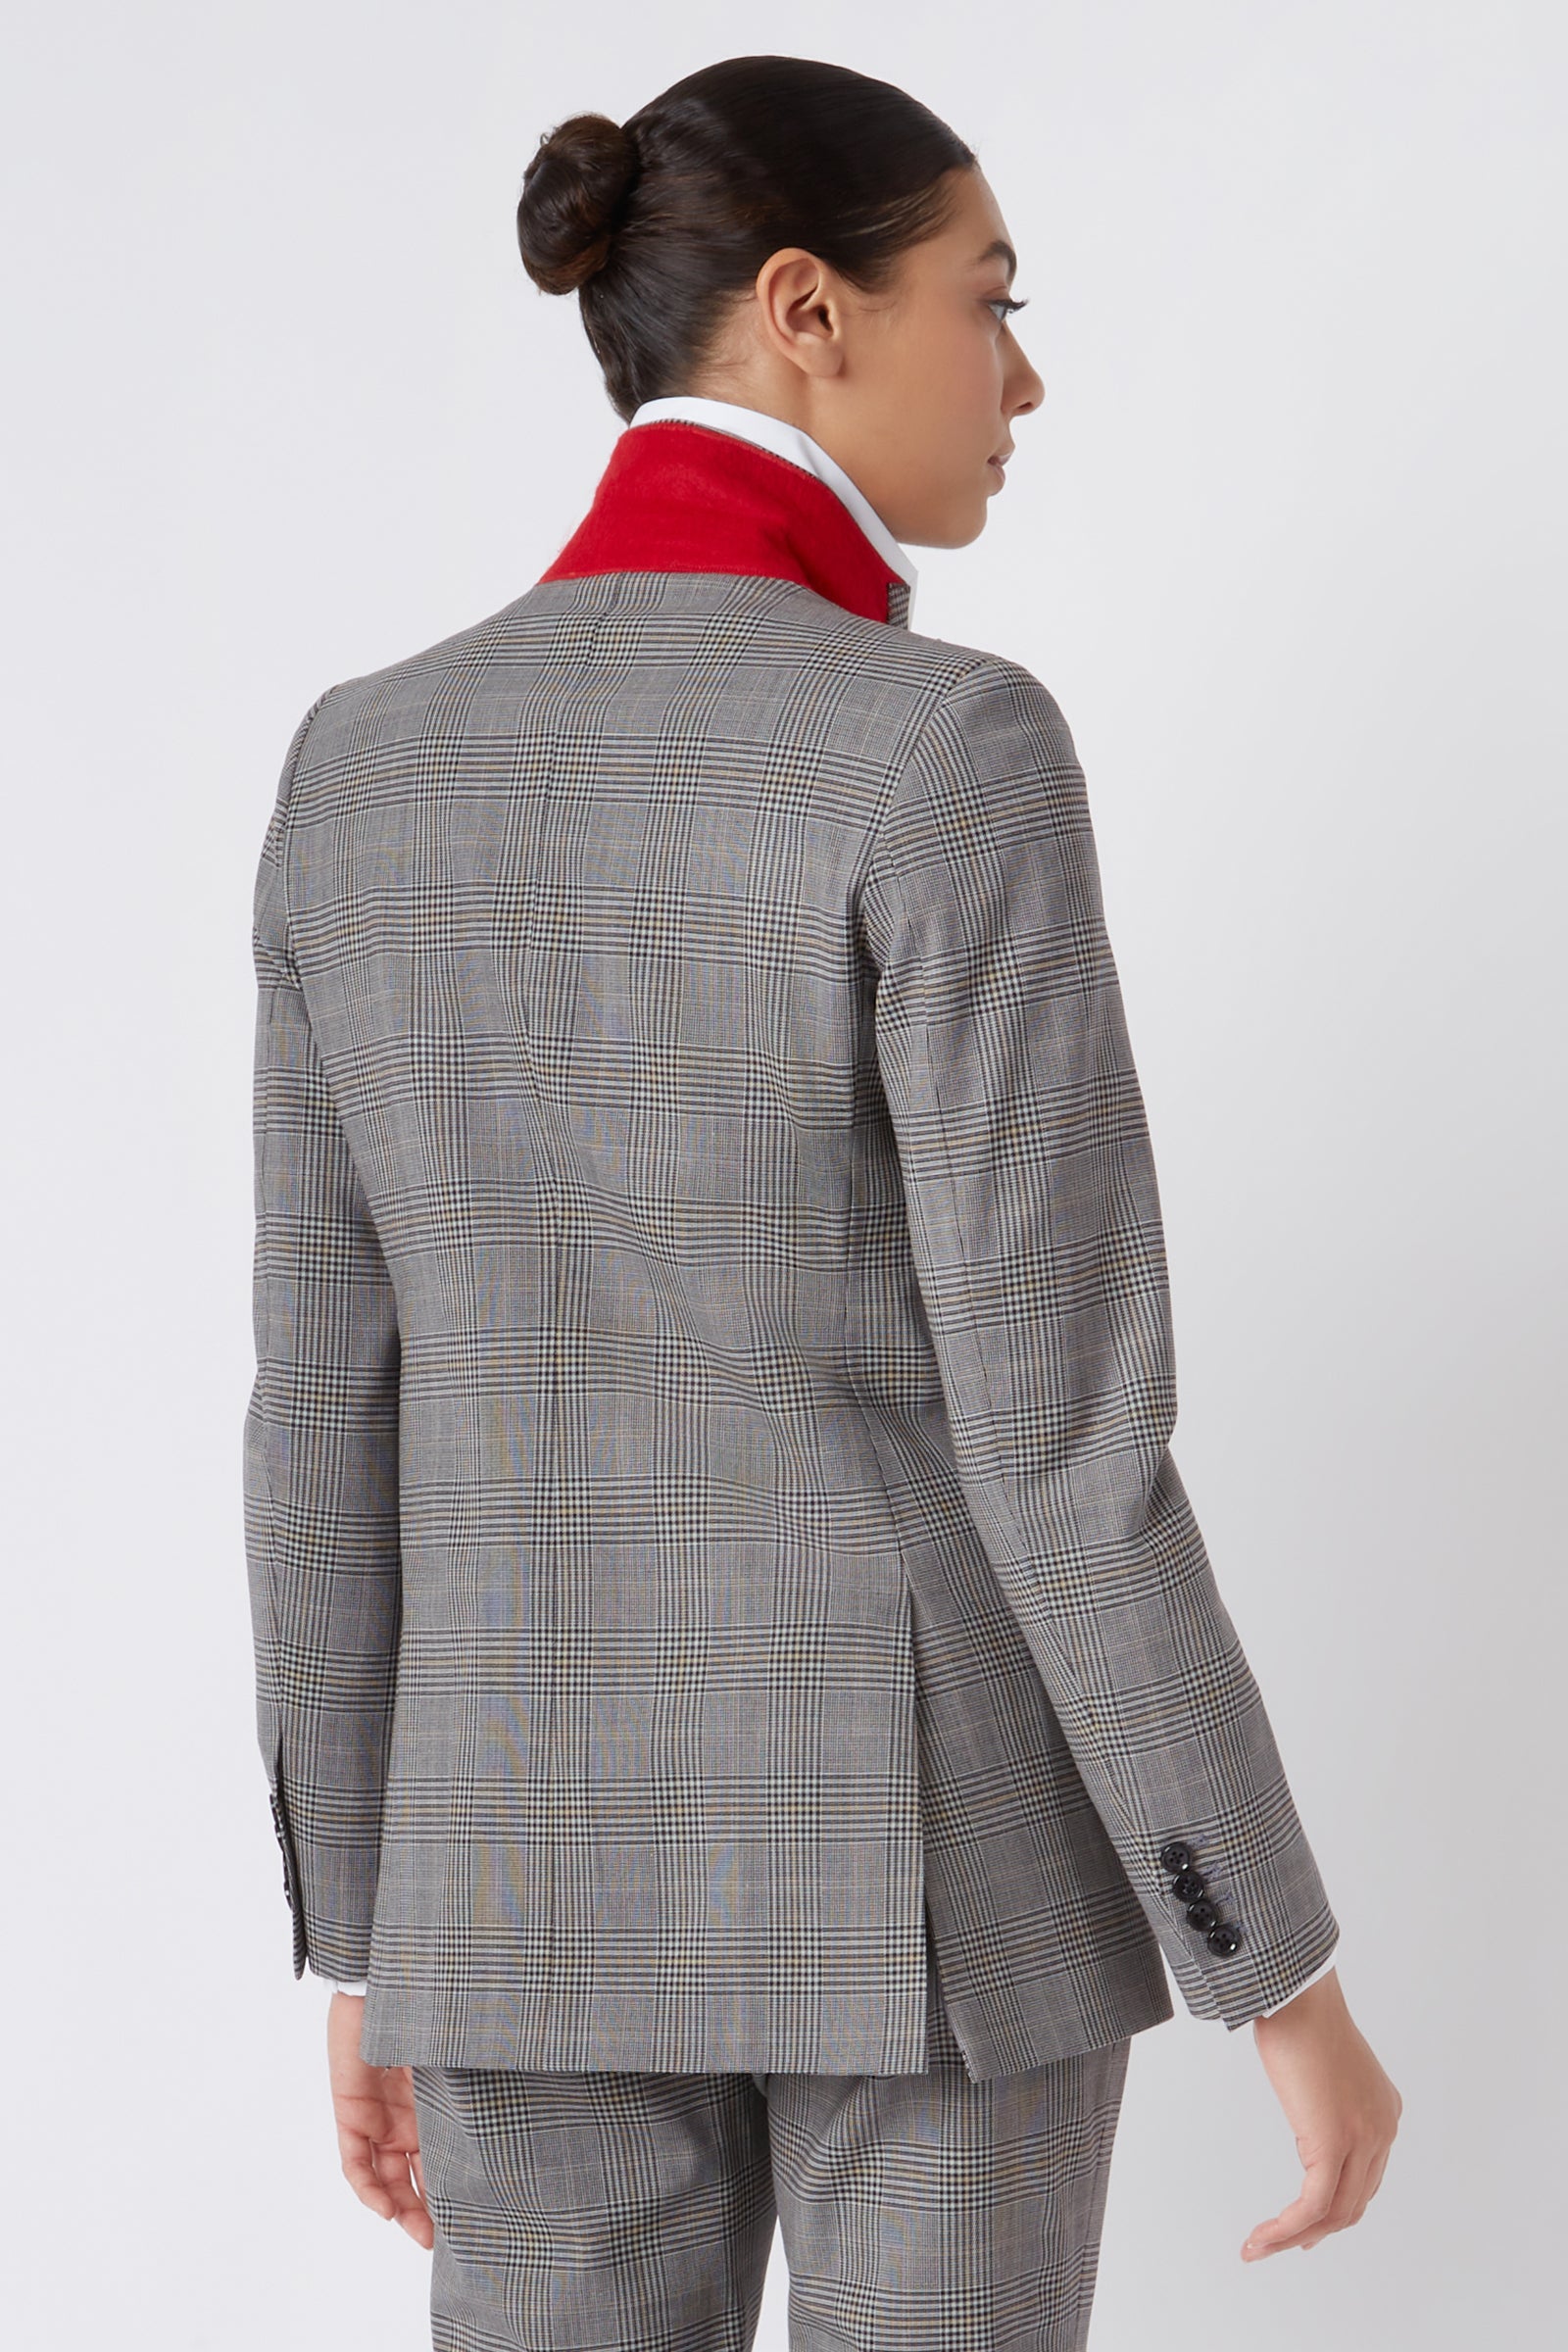 Kal Rieman Madeline Classic Notch Collar Blazer in Glen Plaid on Model Cropped Front View